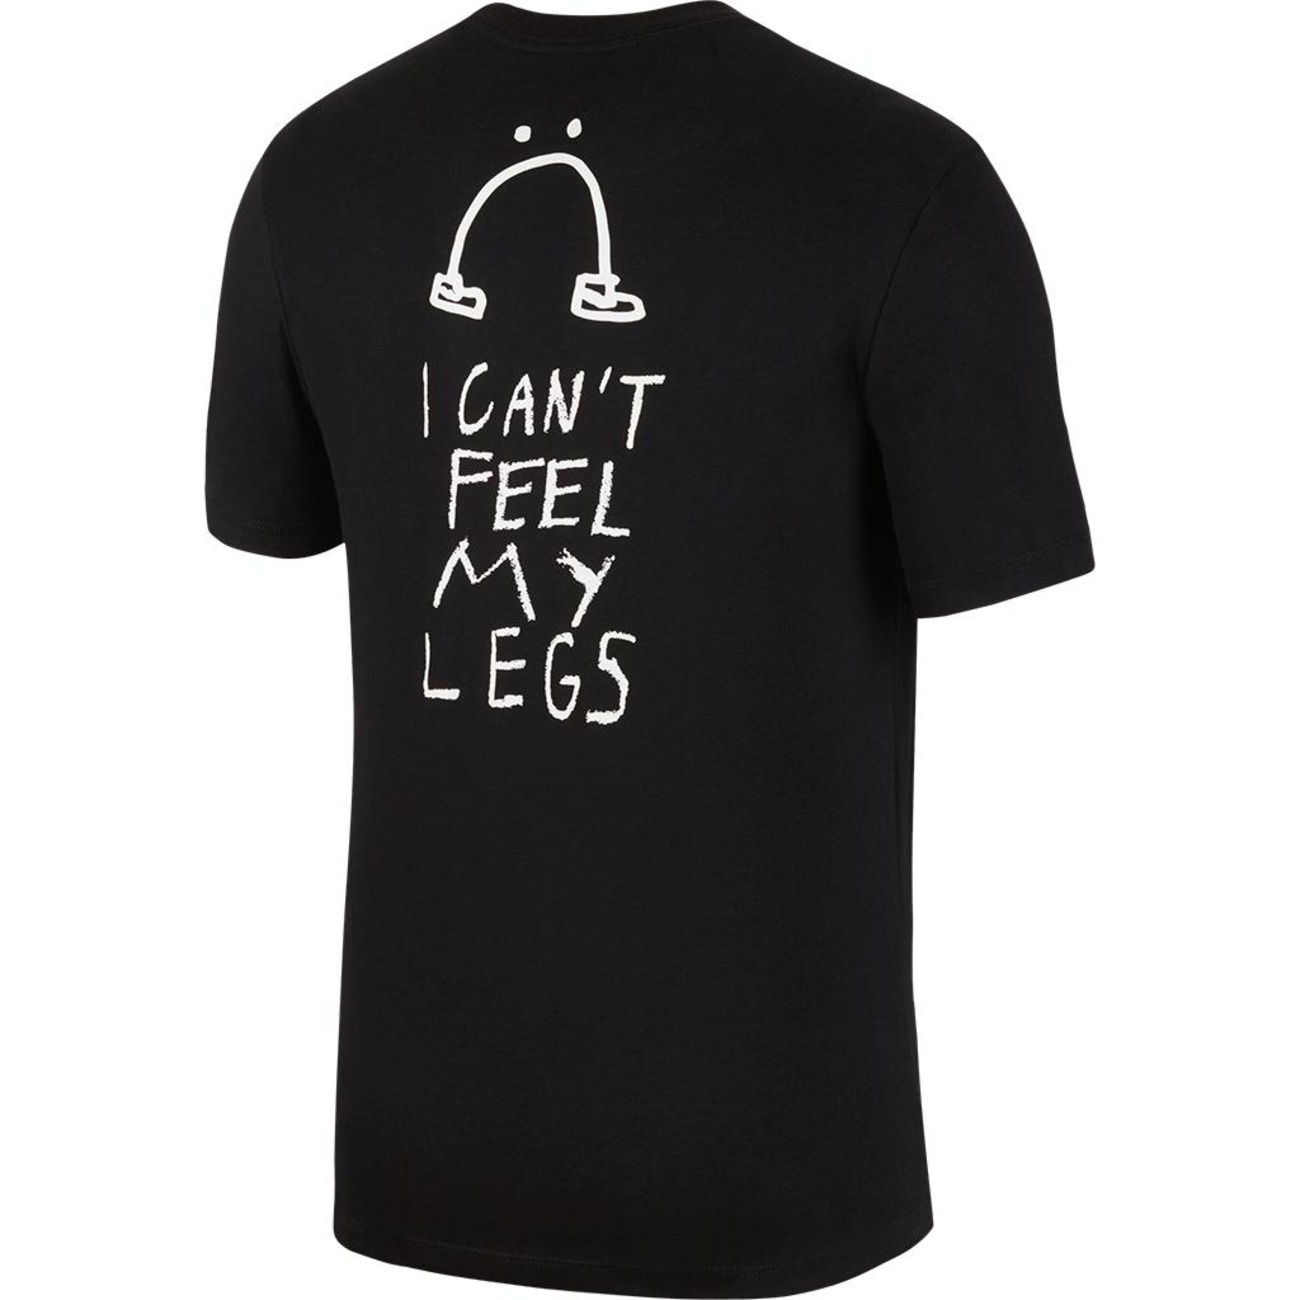 furniture Required Conquer Oferta de Camiseta Nike "I can't feel my legs" Masculina - Nike - Just Do It